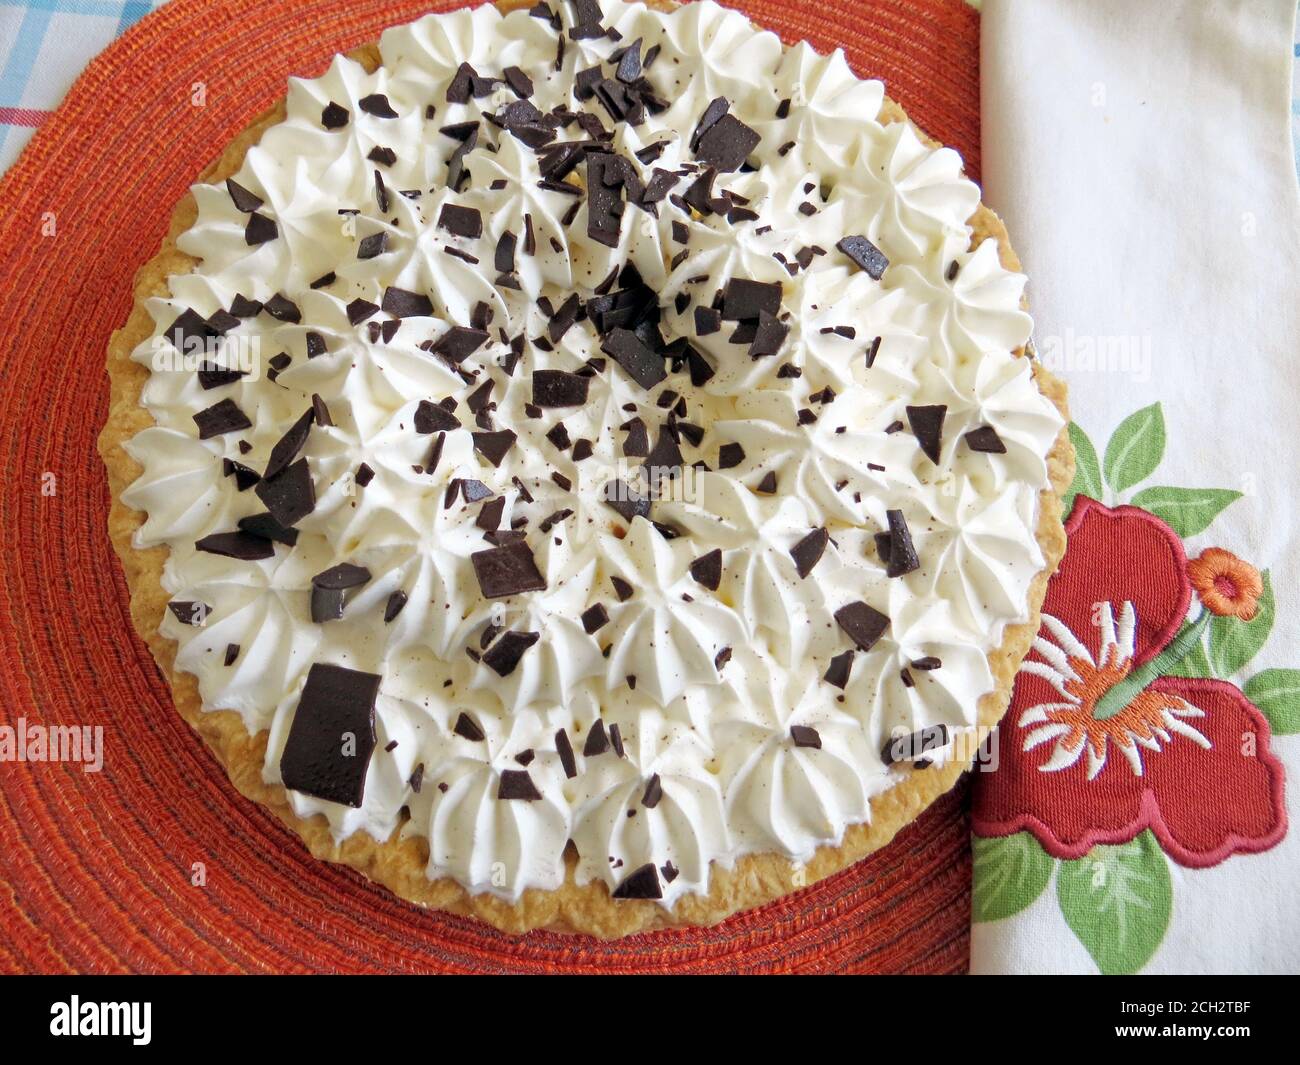 Chocolate pie  with whipped cream topping and chocolate shavings Stock Photo